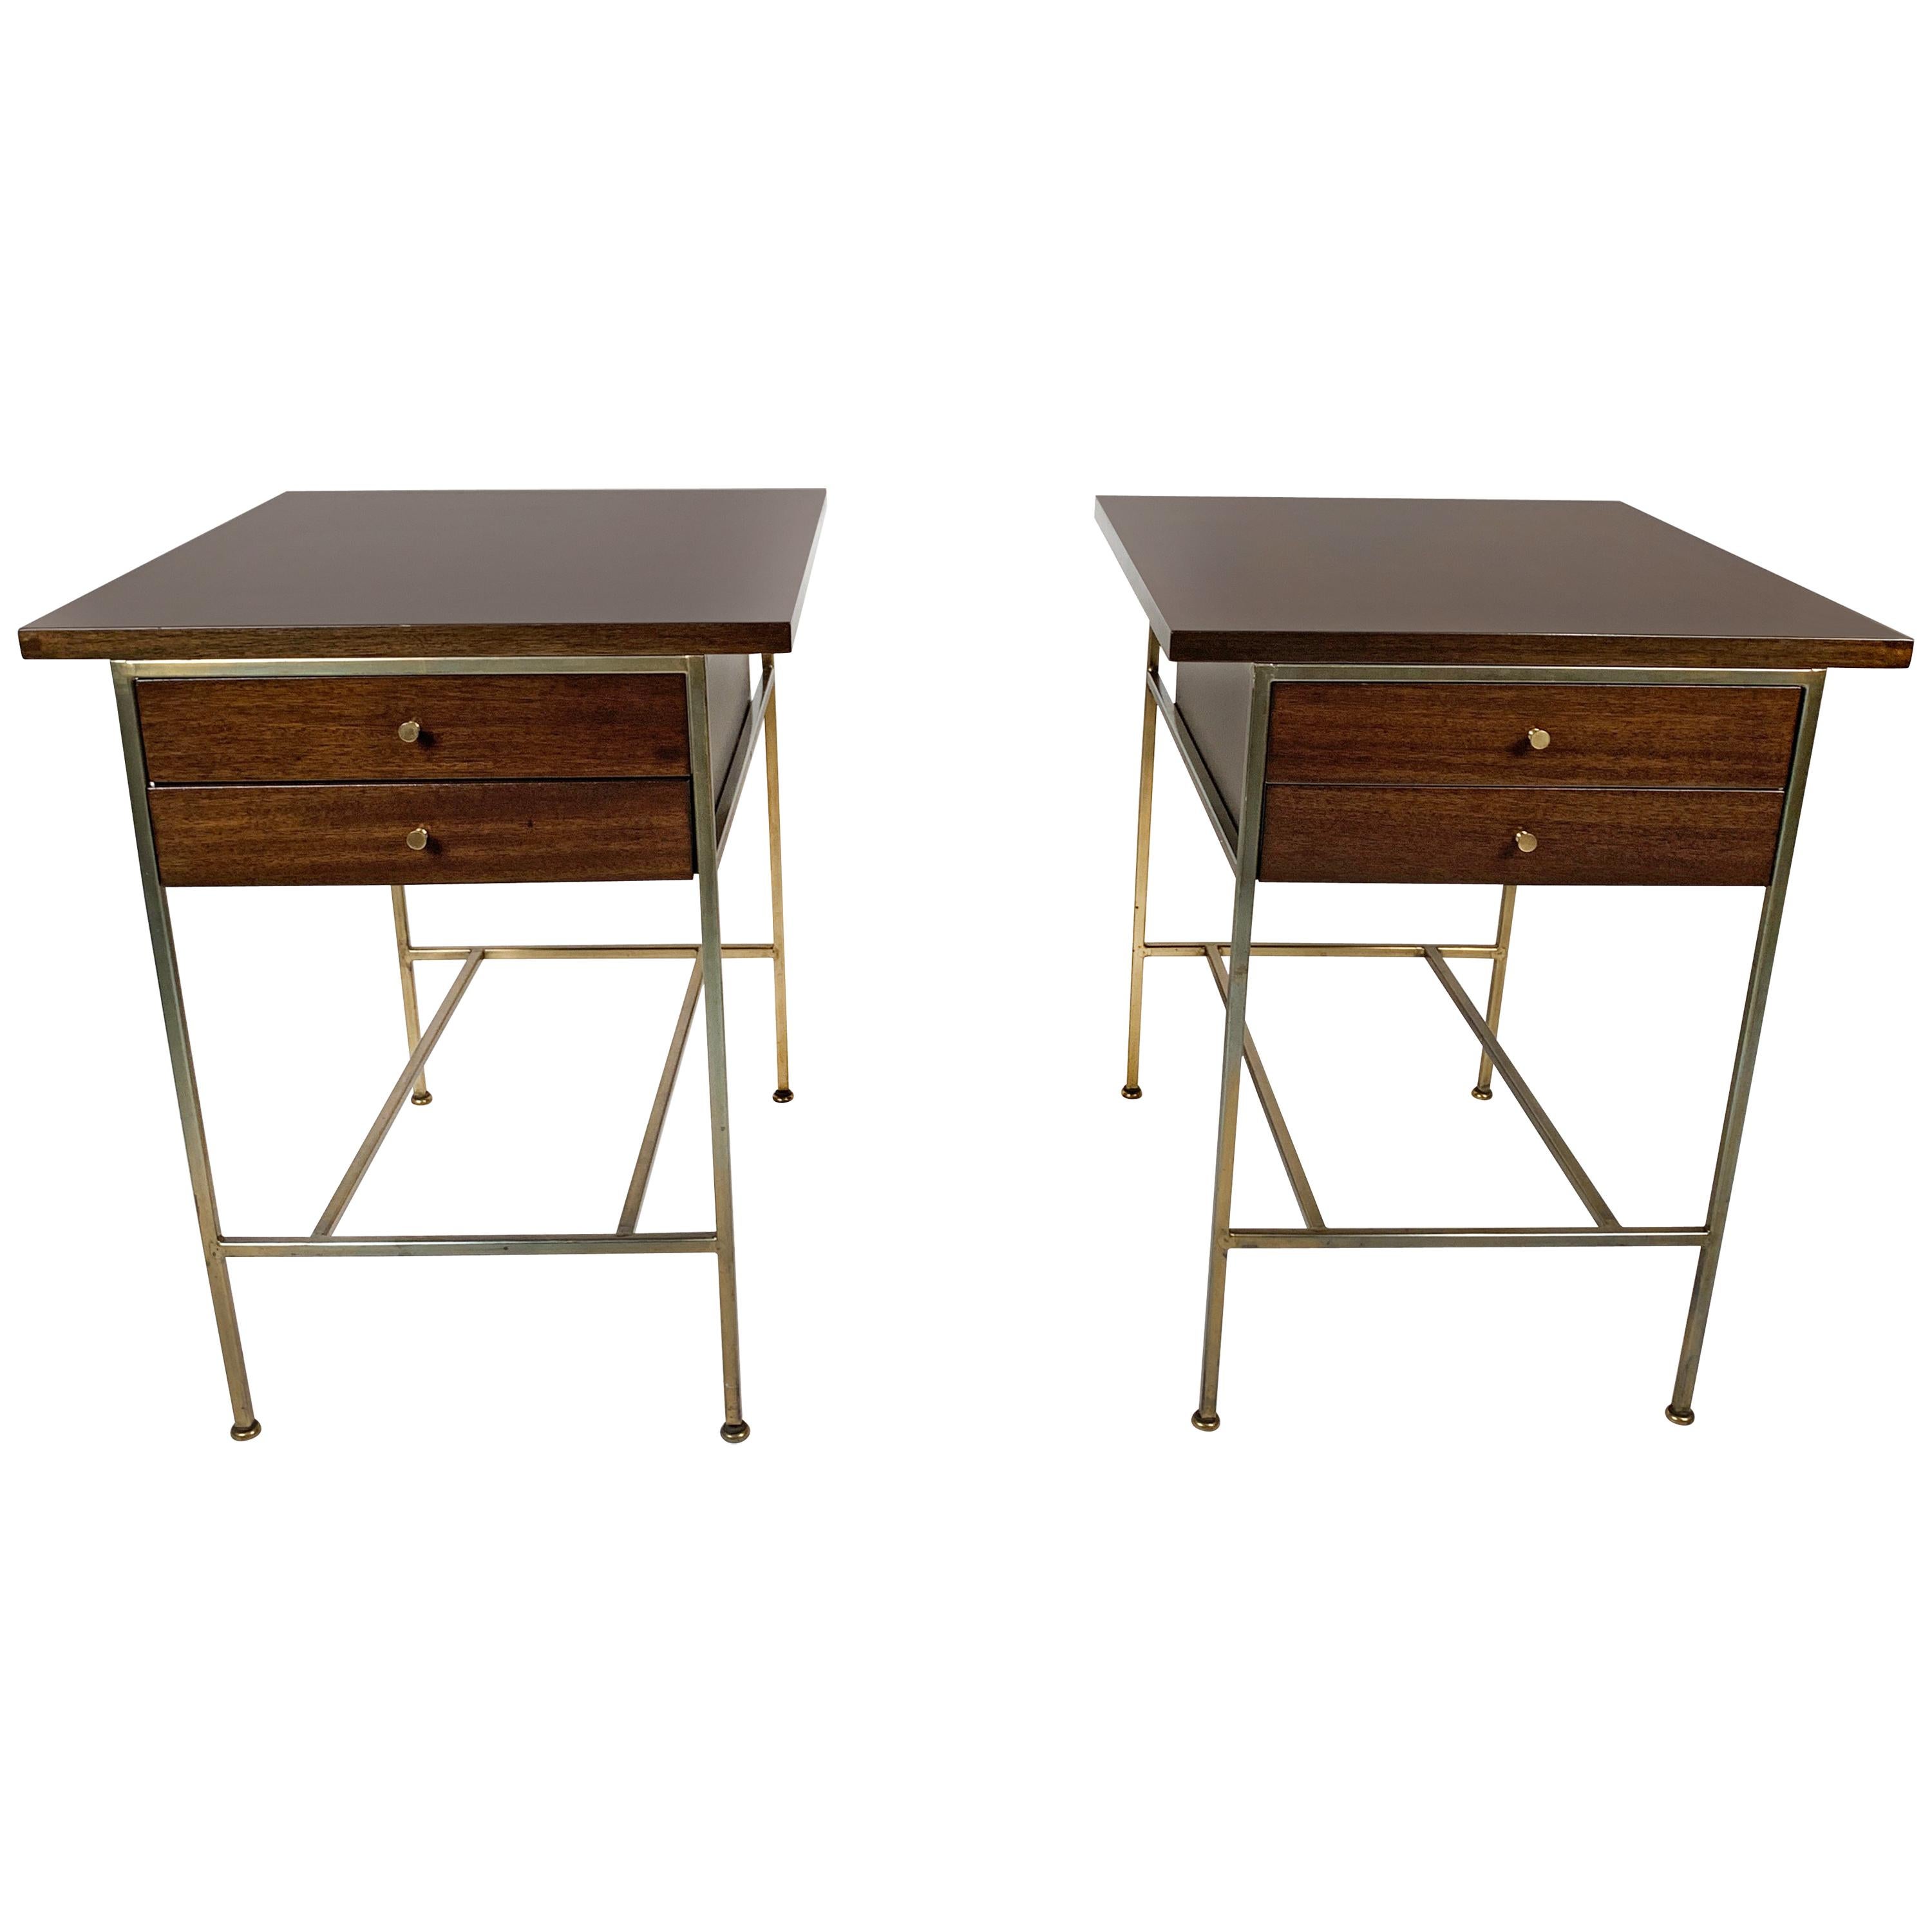 Paul McCobb Irwin Collection Mahogany End Tables or Nightstands